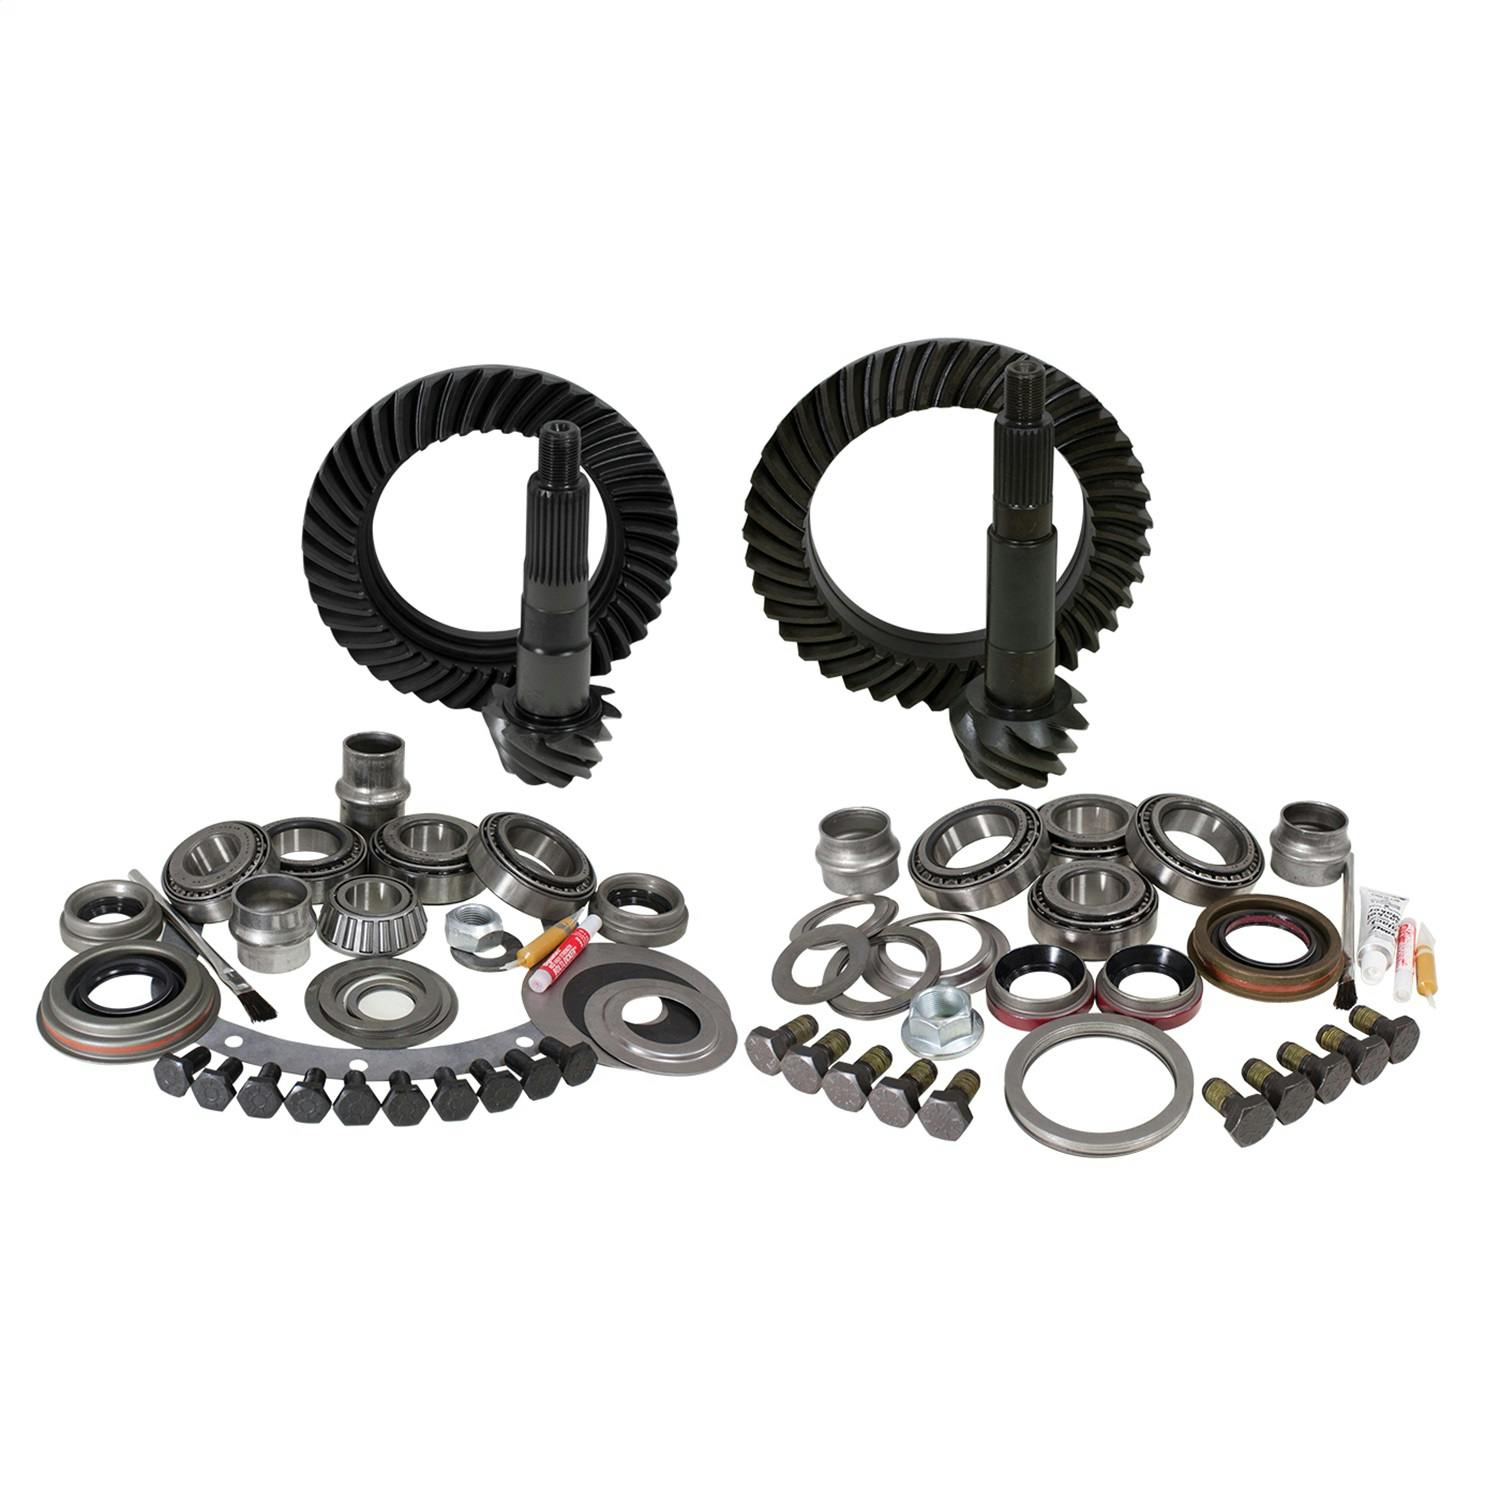 USA Standard Gear ZGK014 Ring And Pinion Set And Complete Install Kit